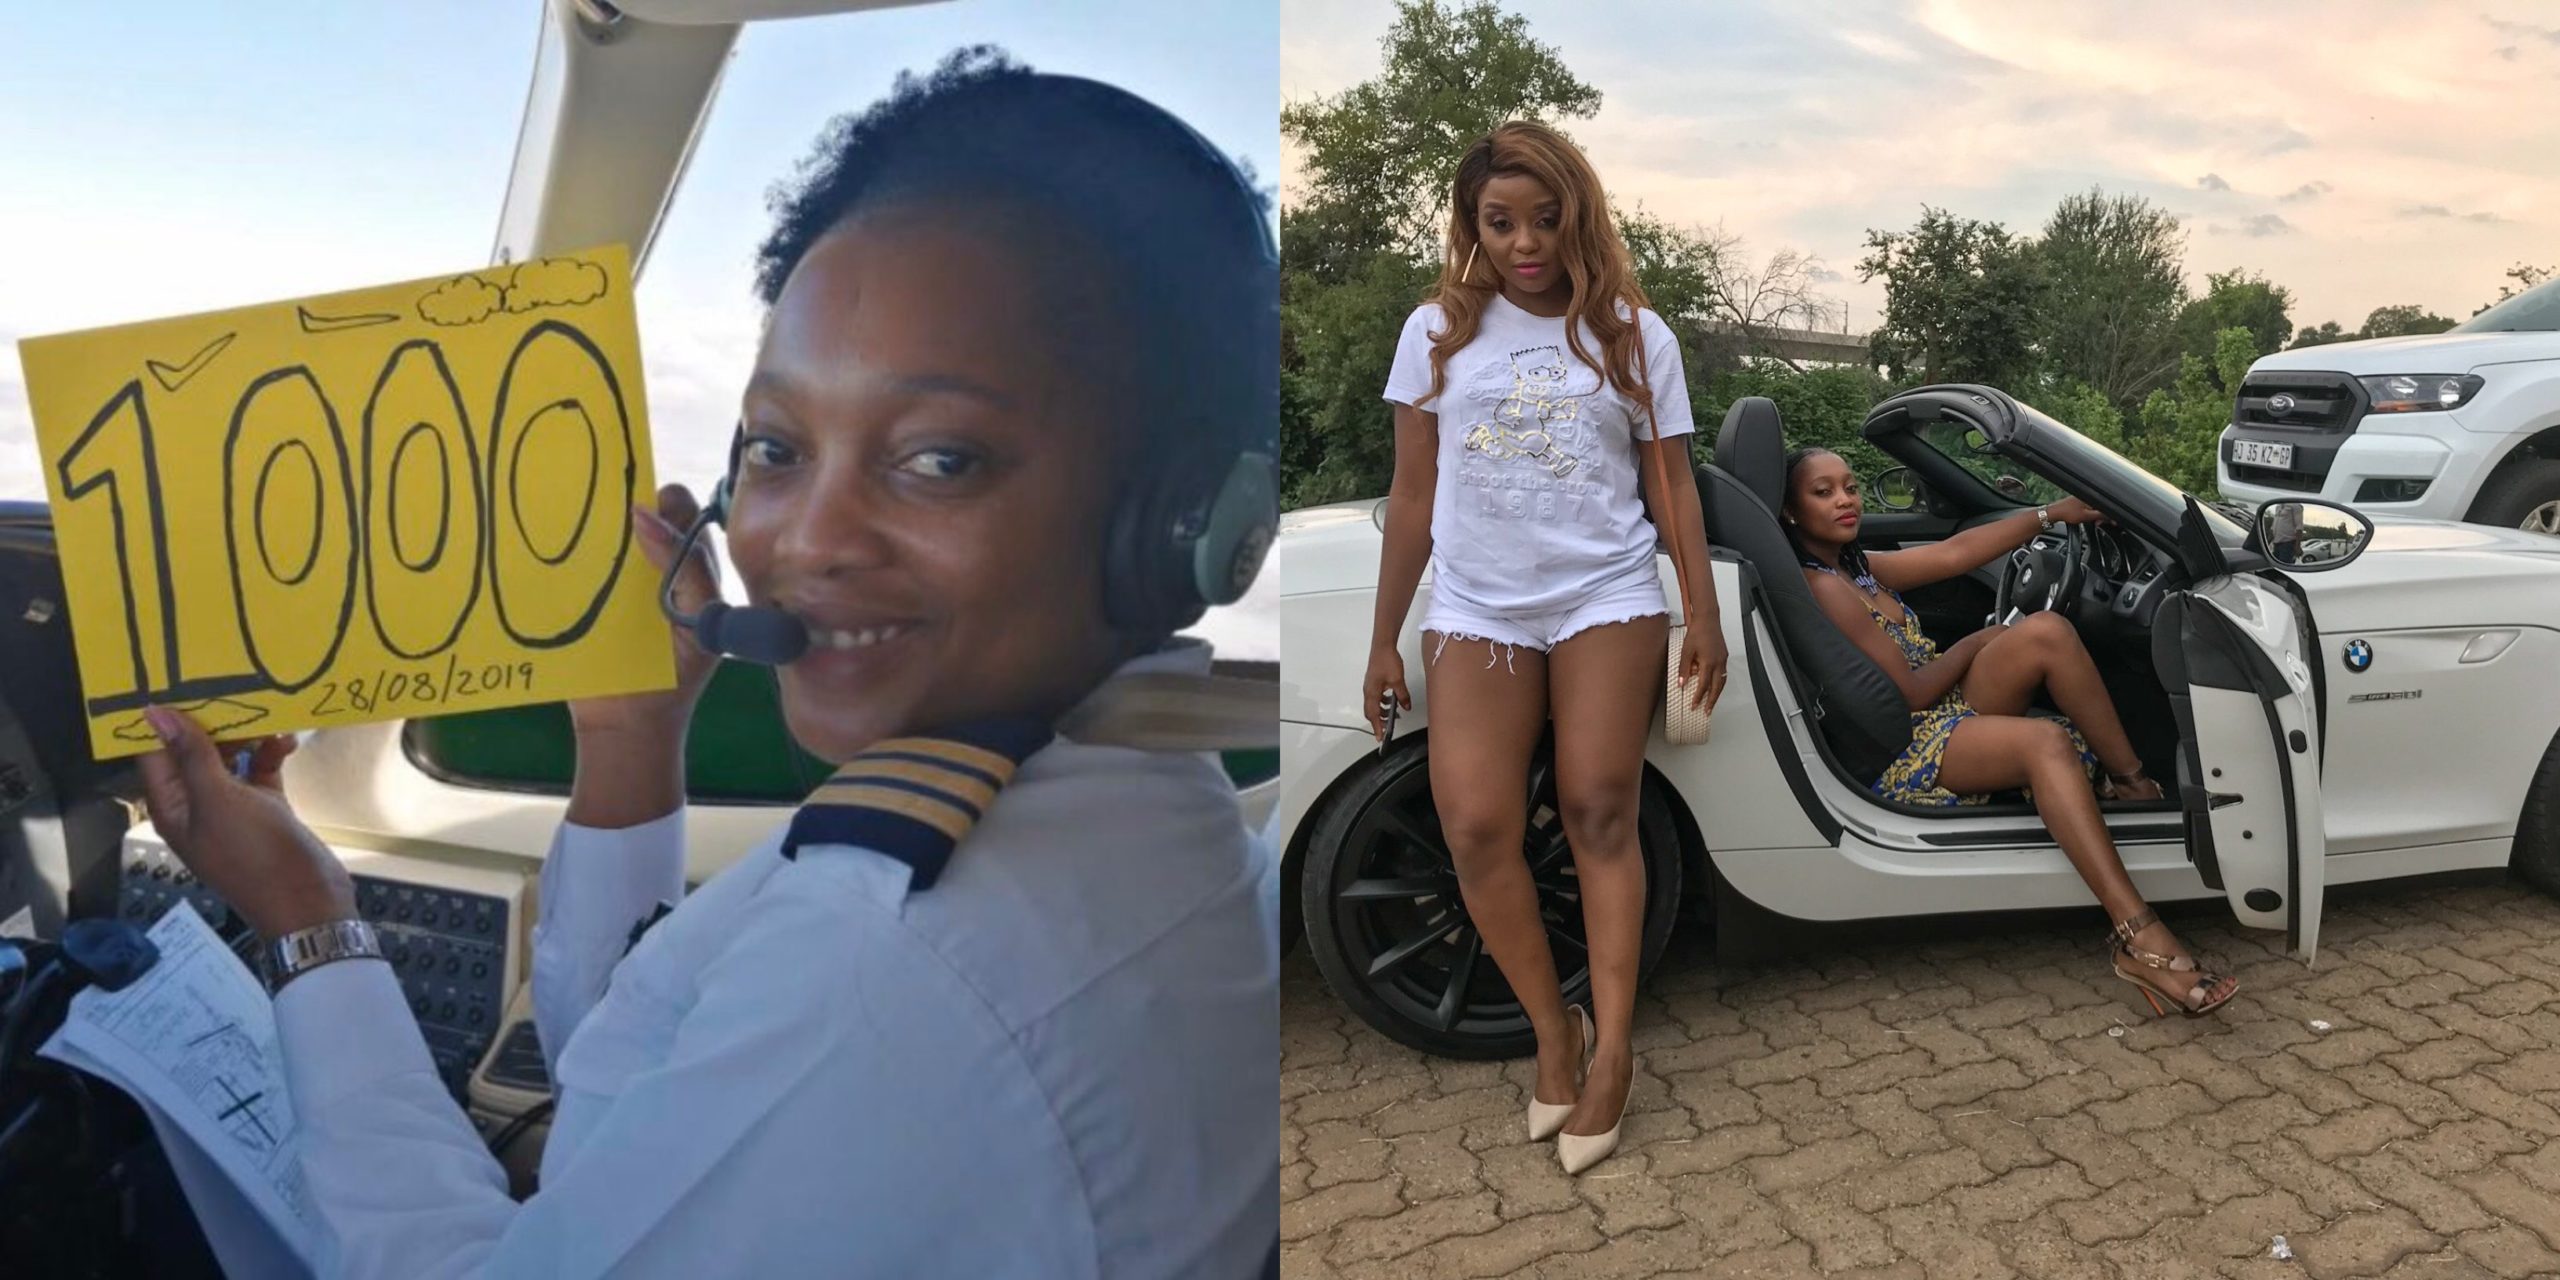 I still cant believe she's gone - Lady mourns her pilot friend who died in a plane crash (Photos)